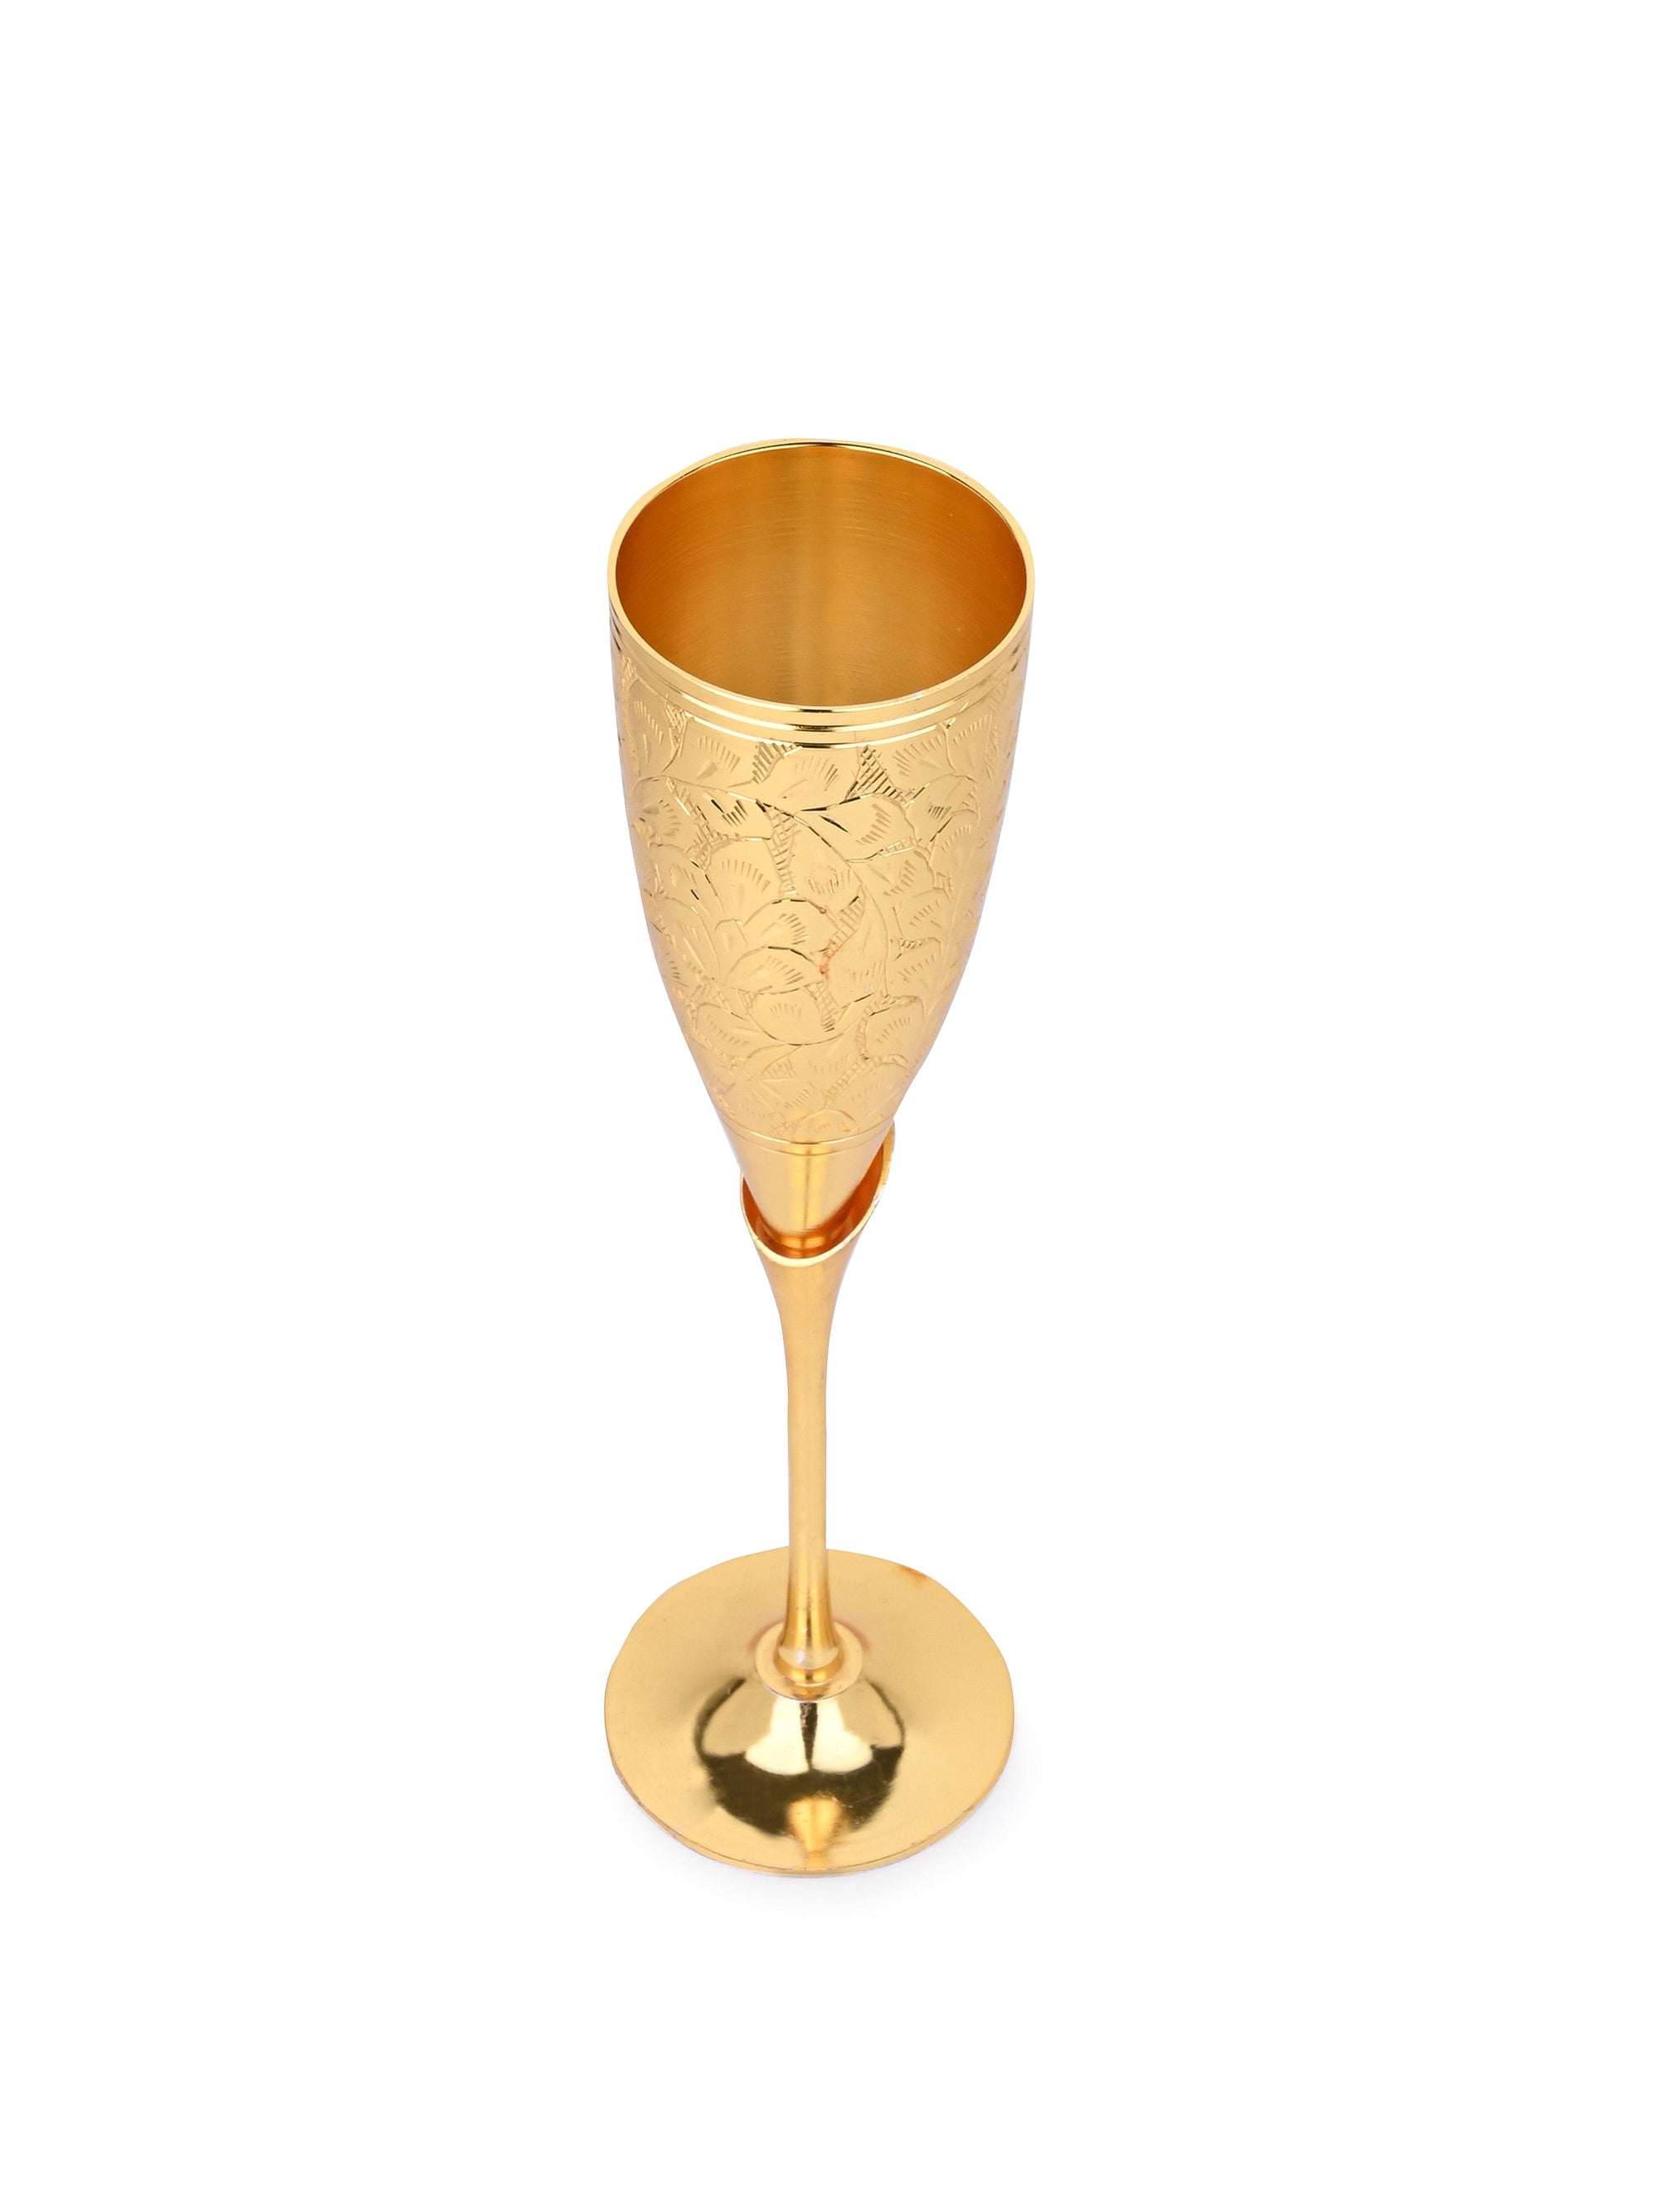 Brass Crafted Champagne Glass - Set of 2 in a Red Velvet Gift Box